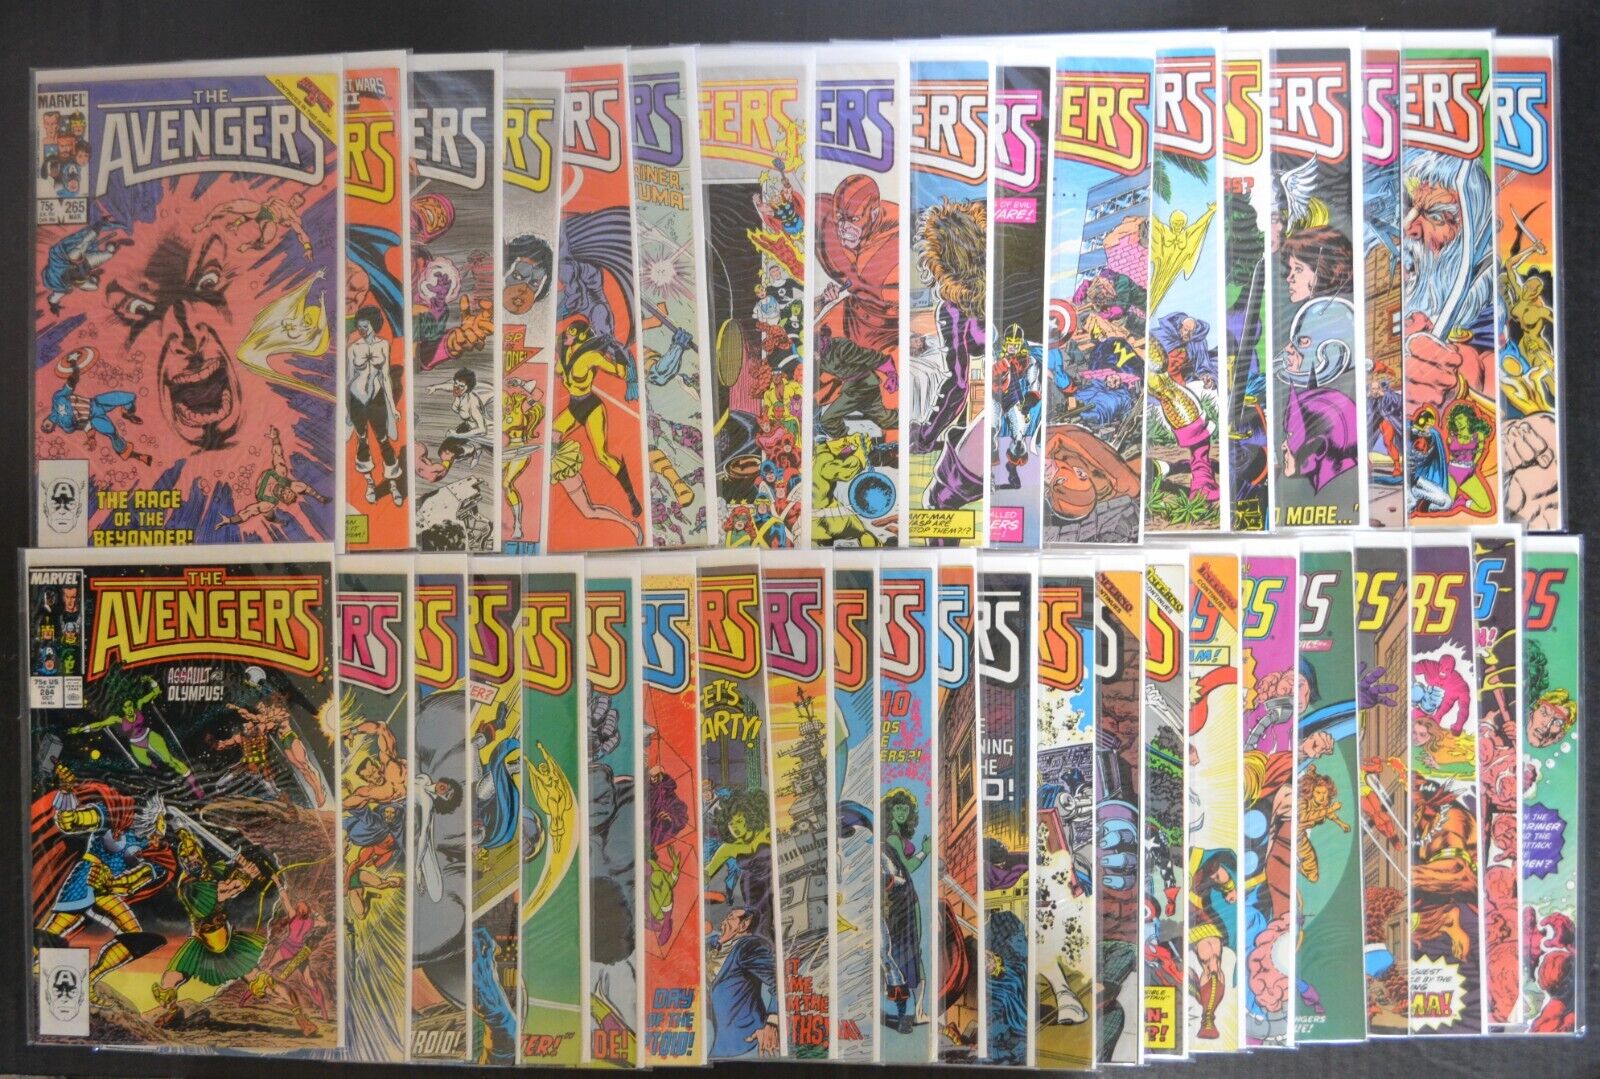 The Avengers #265 (Marvel) Volume 1 Copper Age Comic Book Lot; 40 Amazing Issues